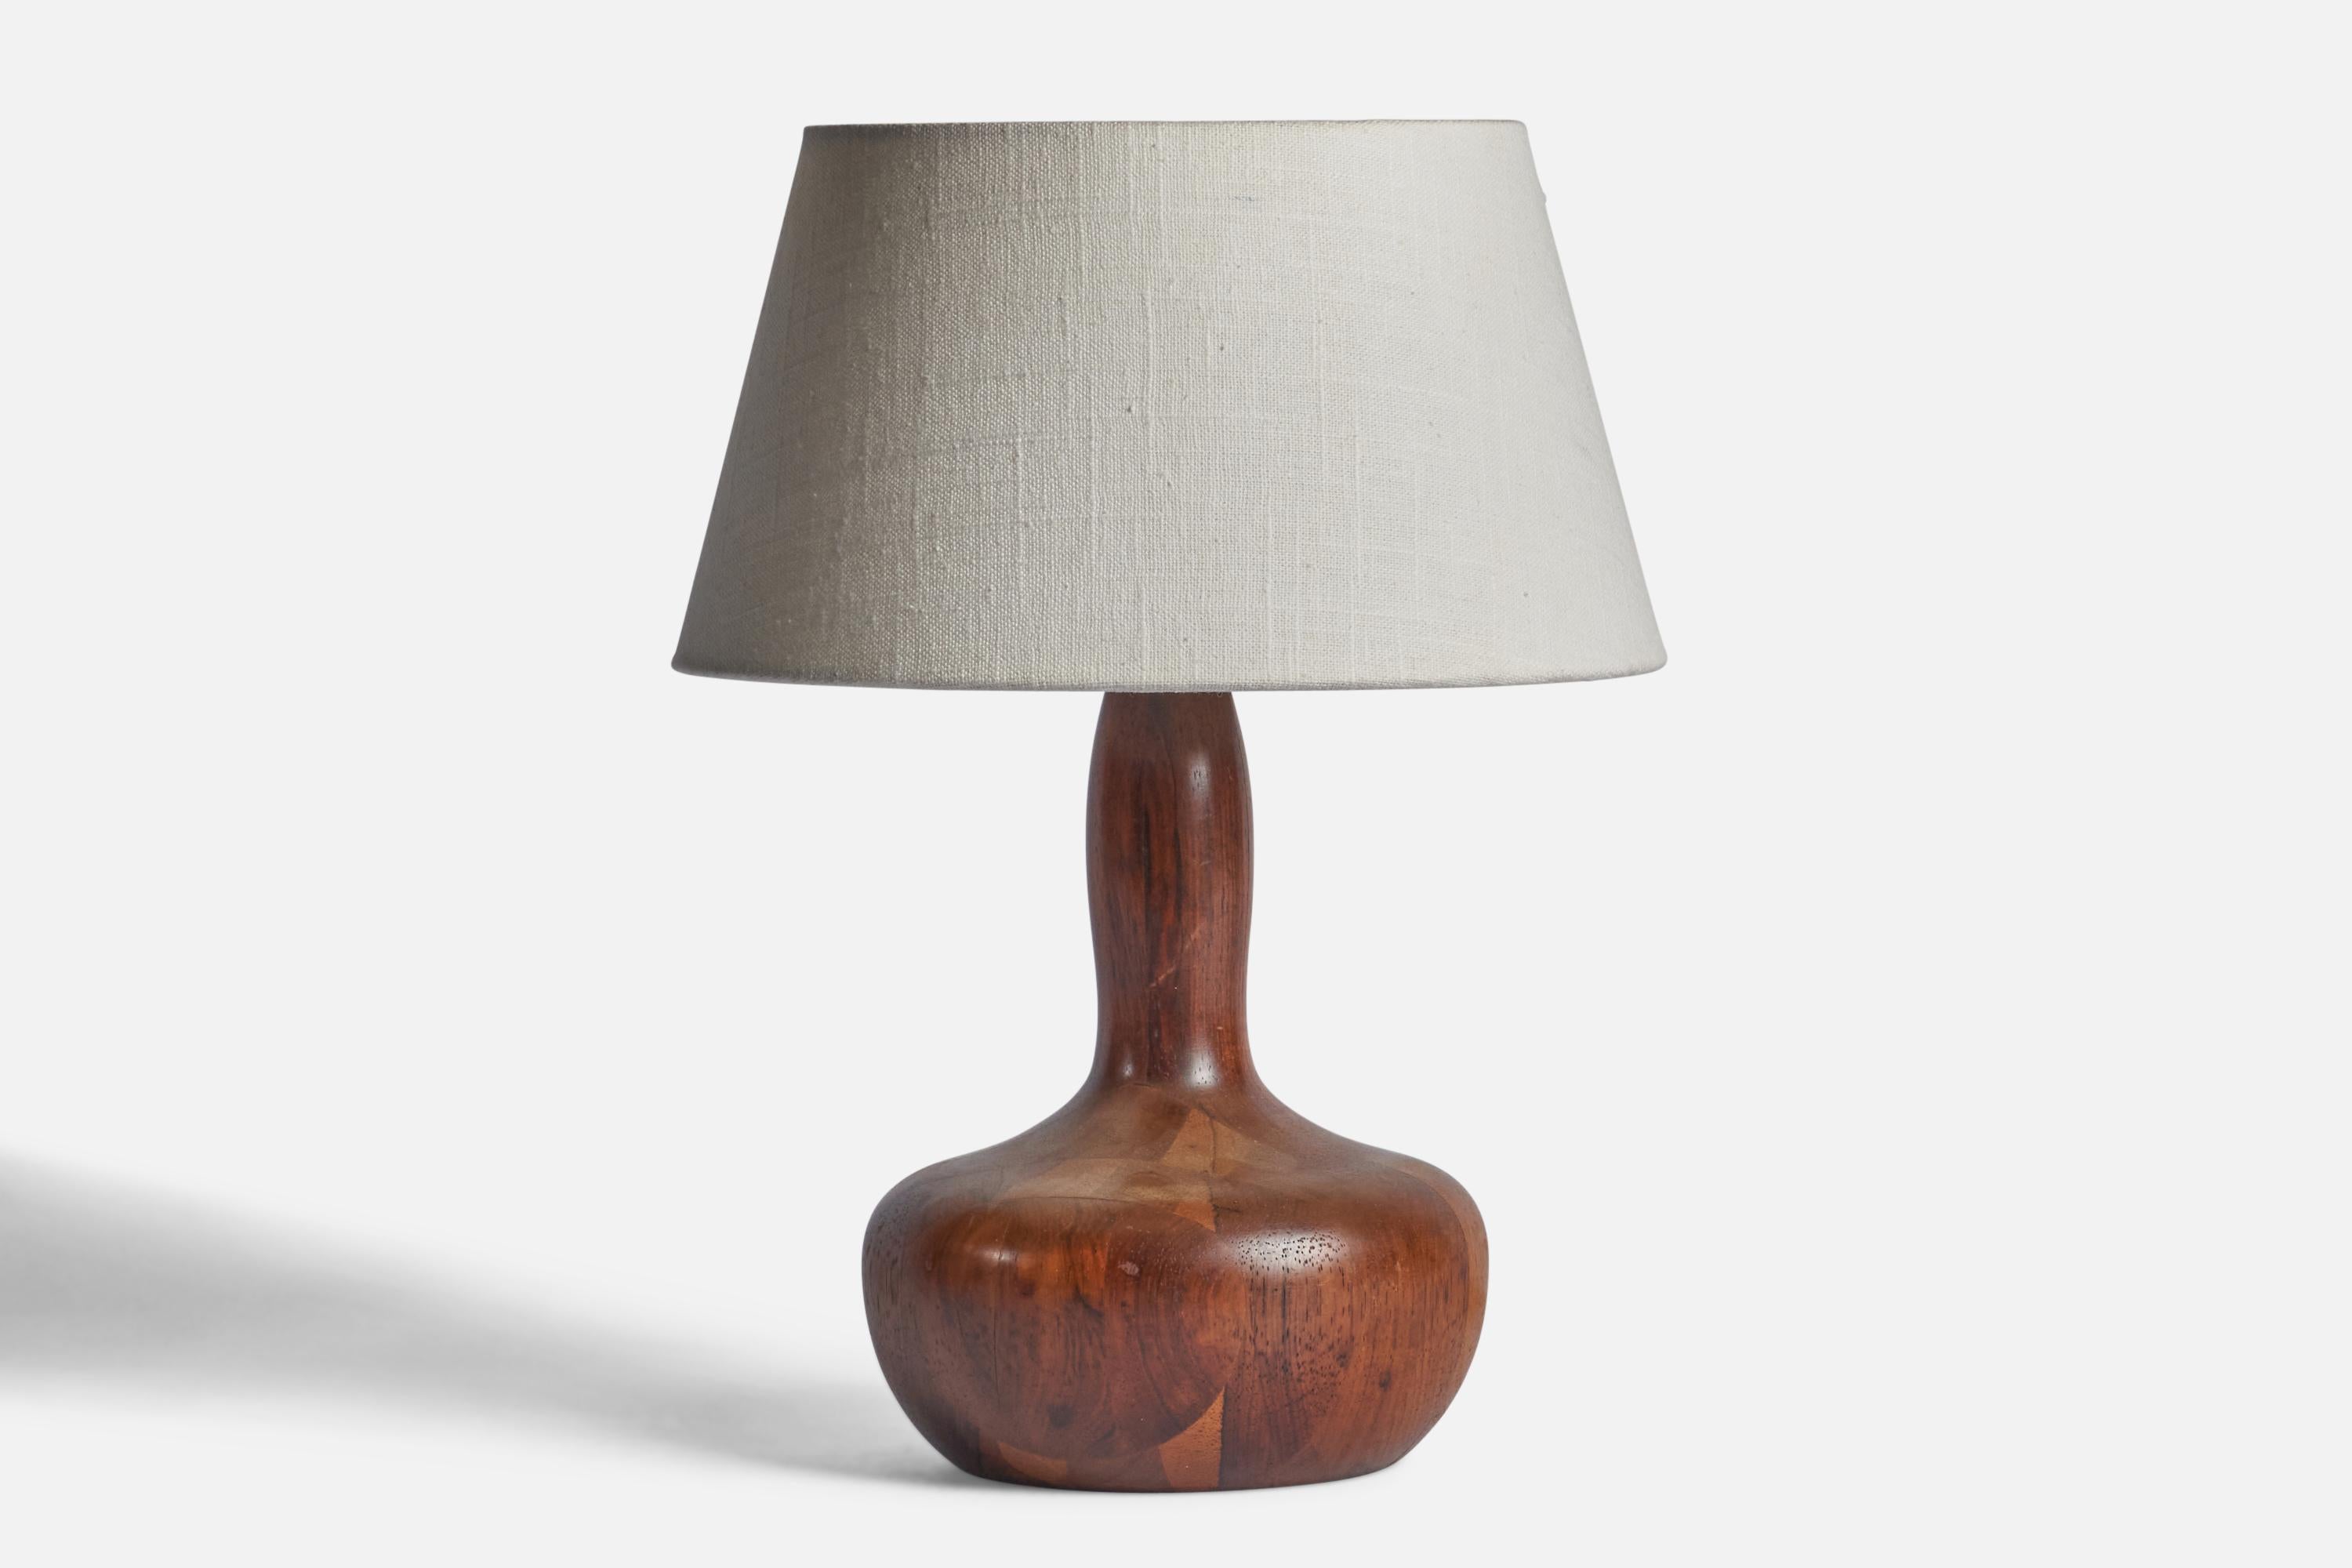 An organic walnut table lamp designed and produced in Denmark, 1950s.

Dimensions of Lamp (inches): 10.75